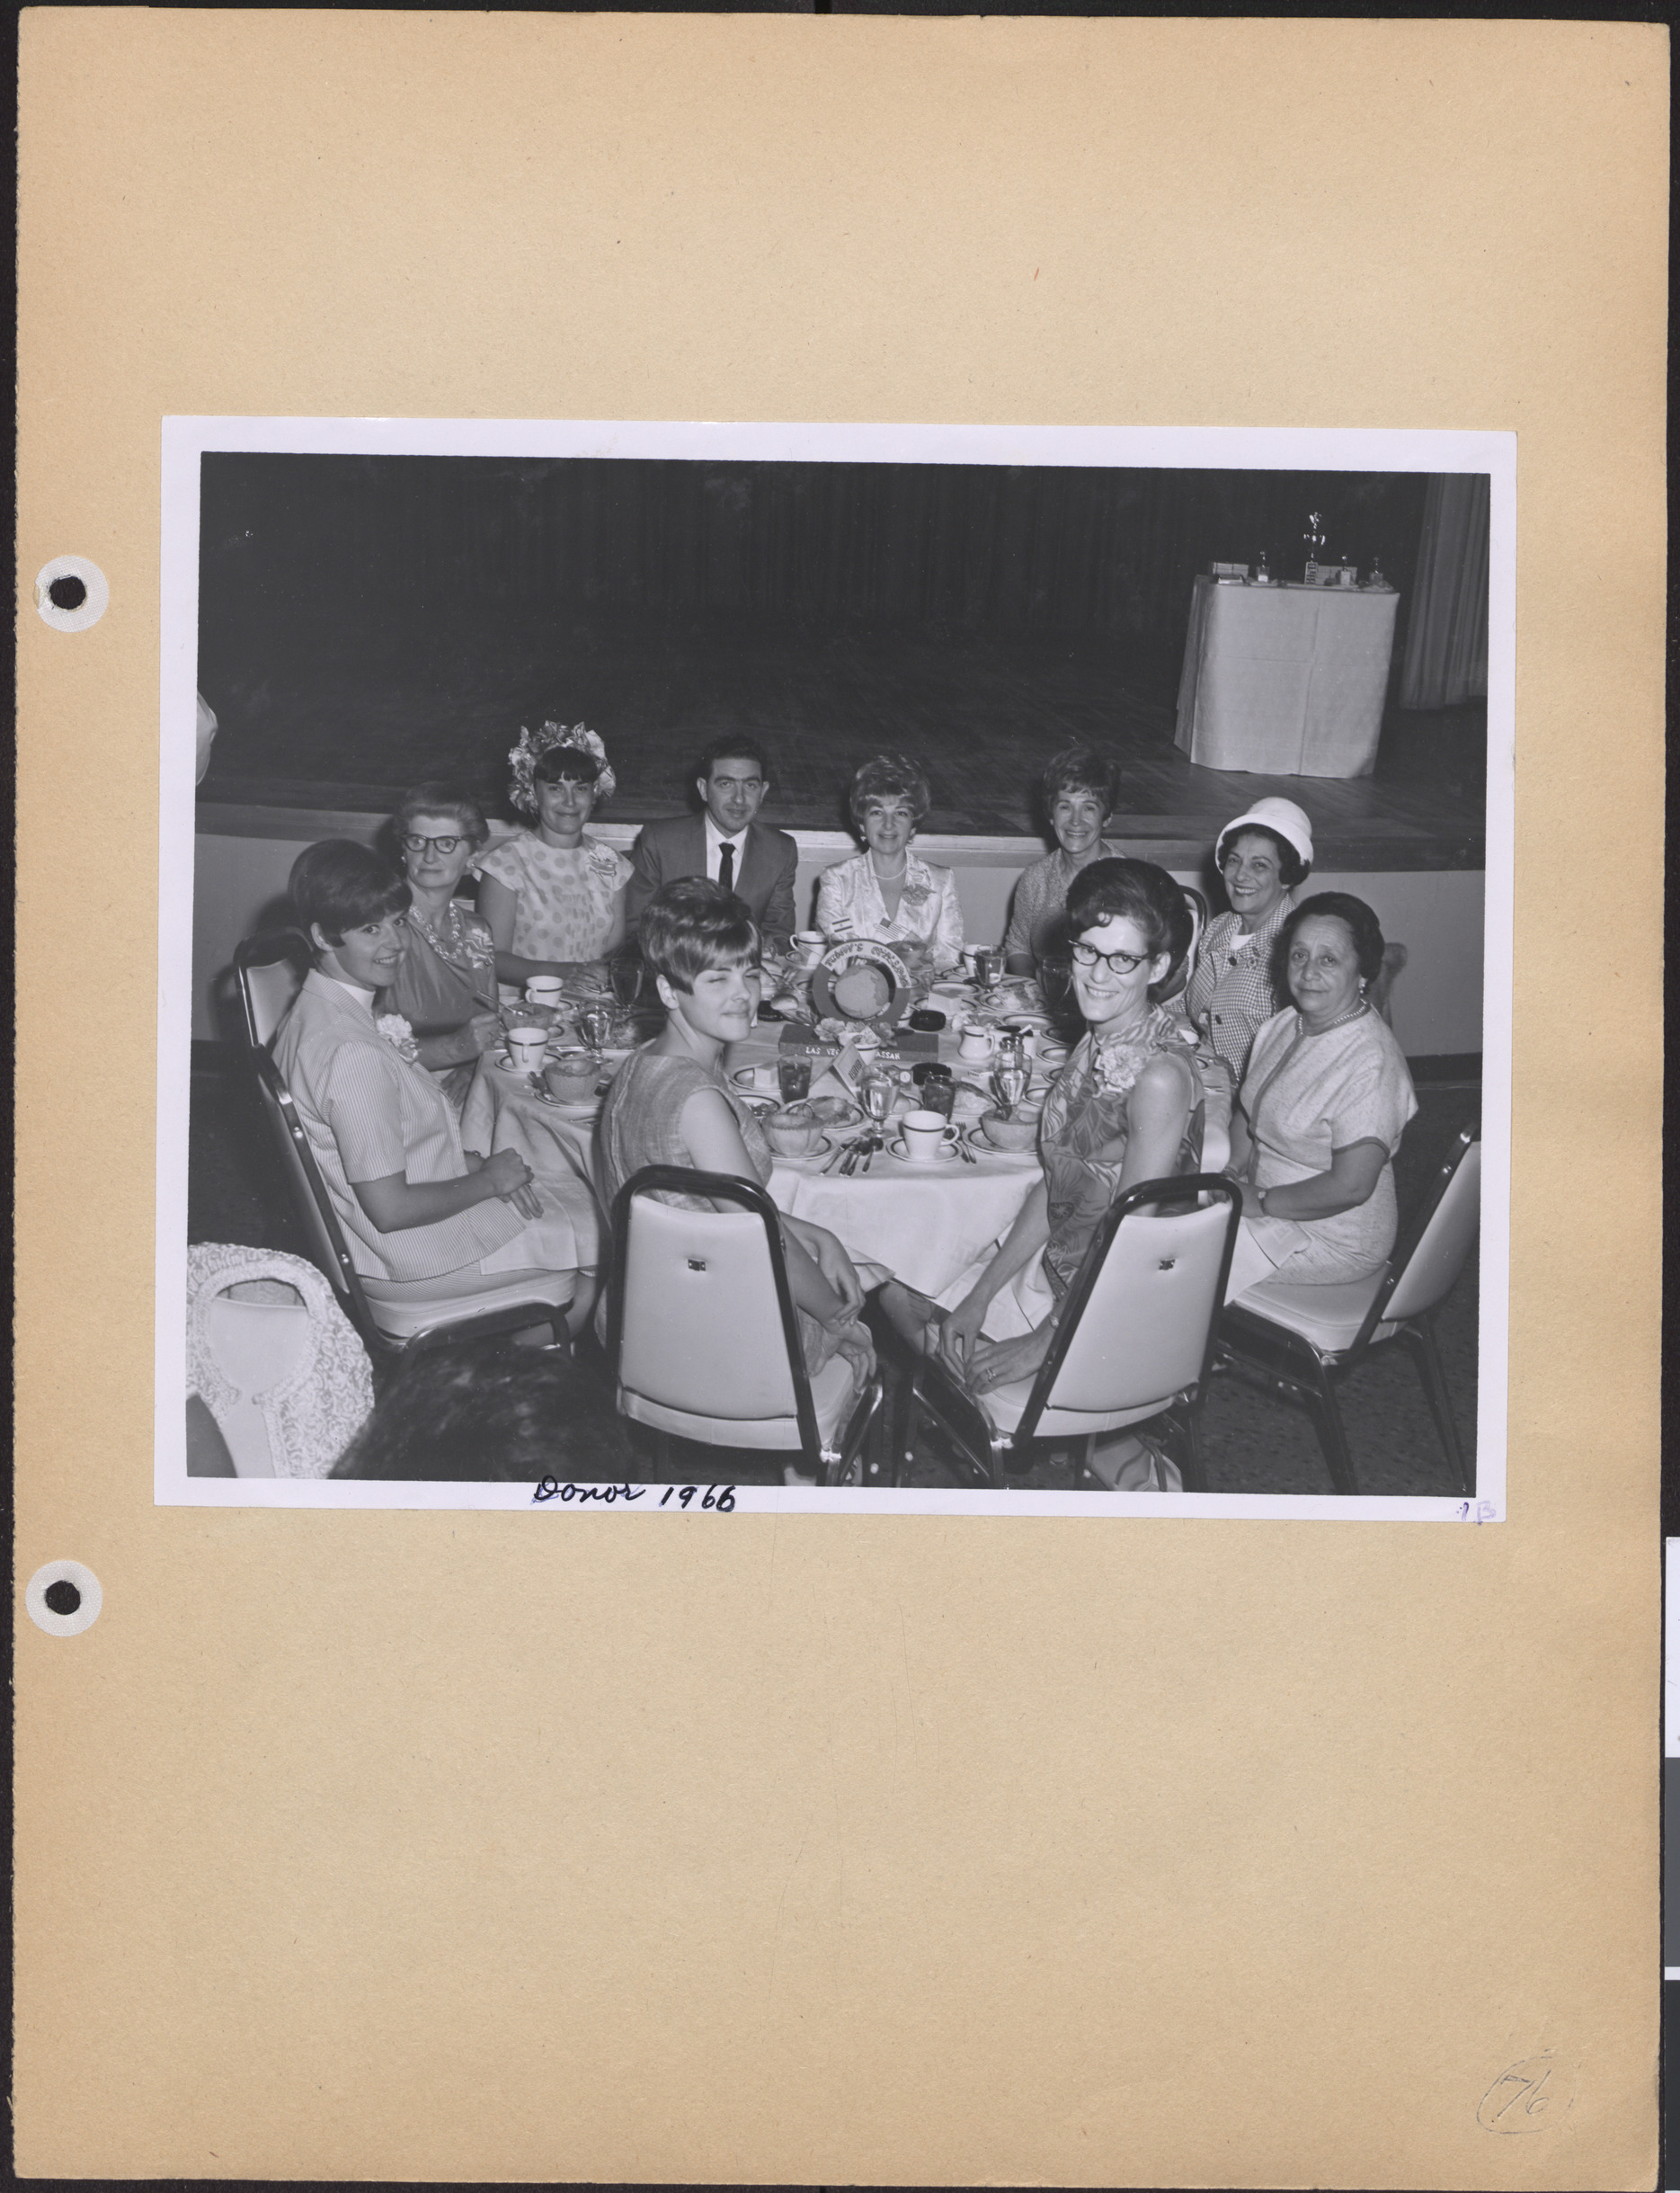 Photograph of Hadassah's Second Donor Luncheon, May 16, 1966